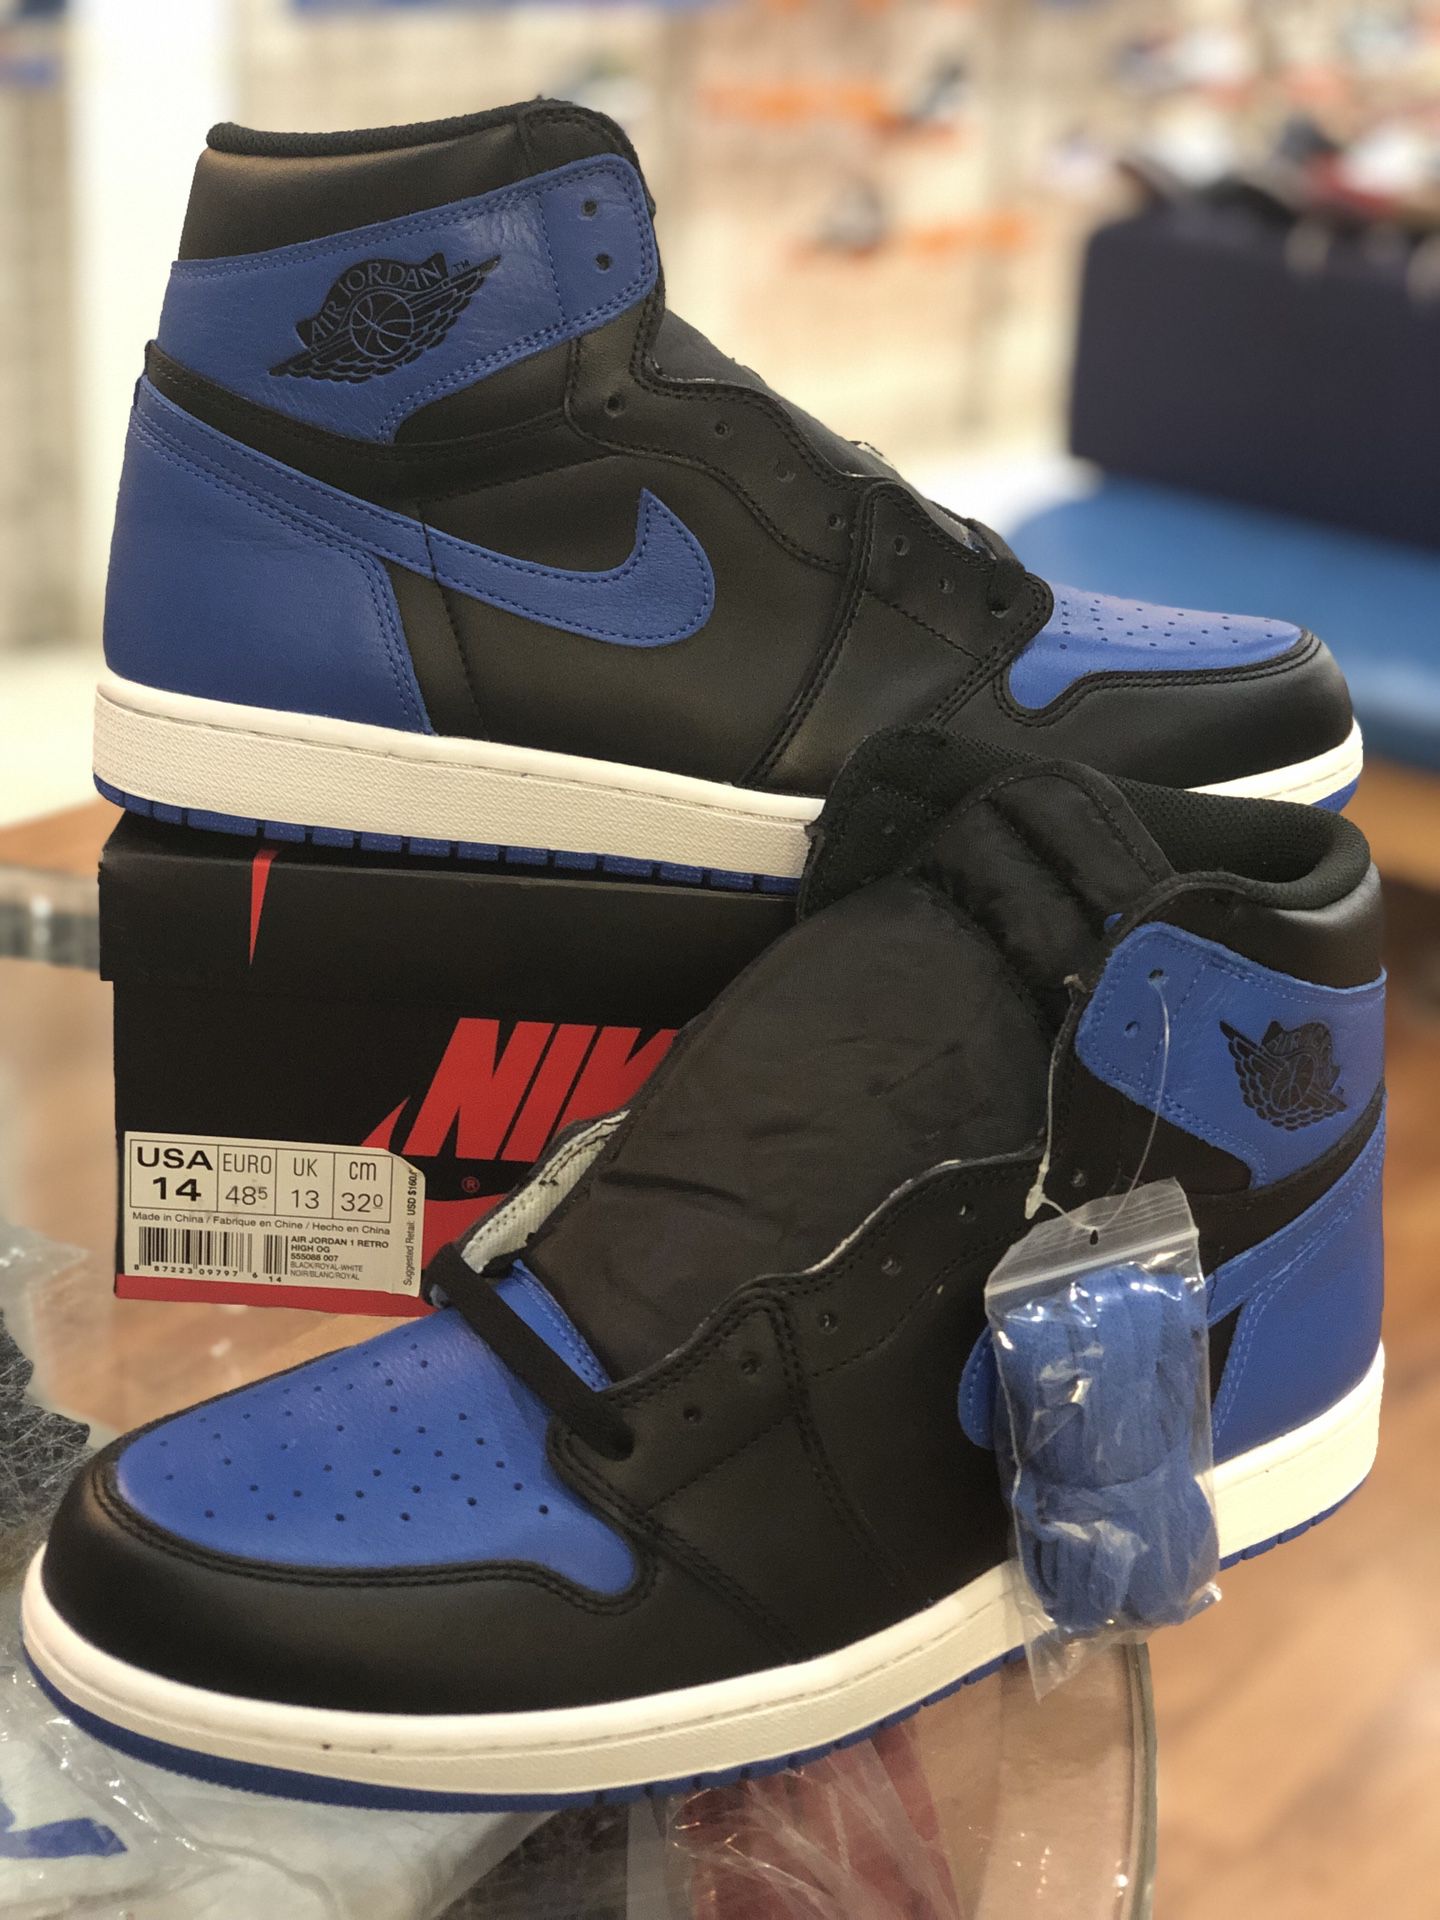 Brand new Royal 1s size 14